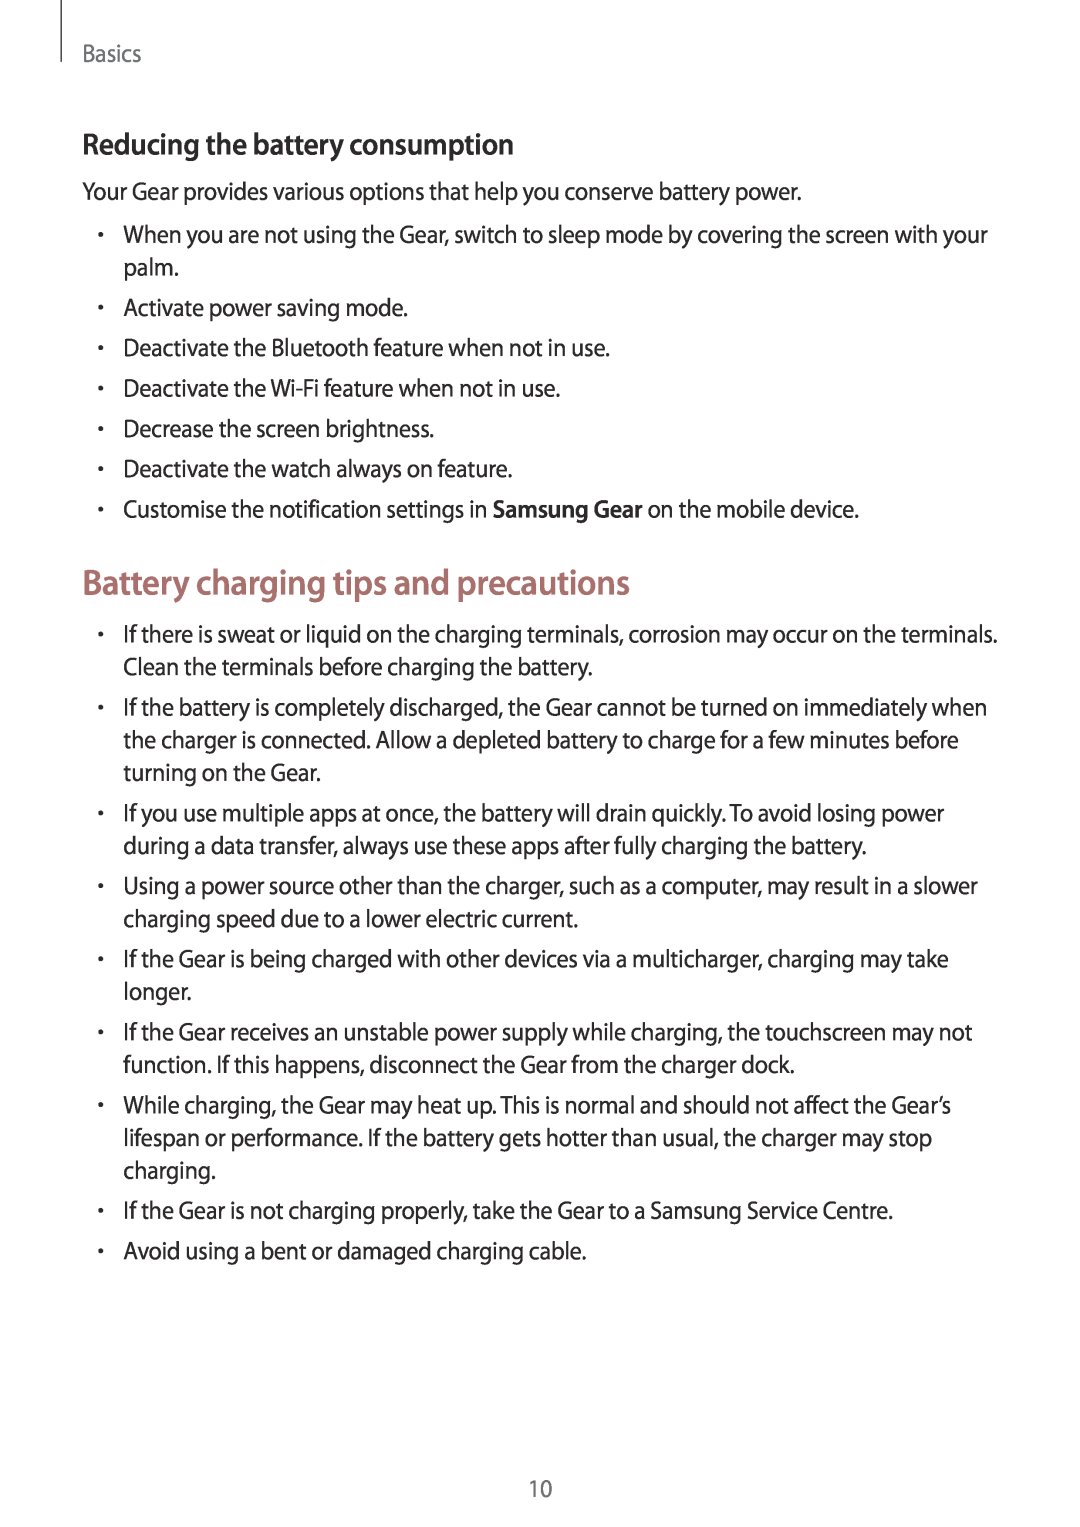 Samsung SM-R3600DANXEF, SM-R3600ZBADBT Battery charging tips and precautions, Reducing the battery consumption, Basics 